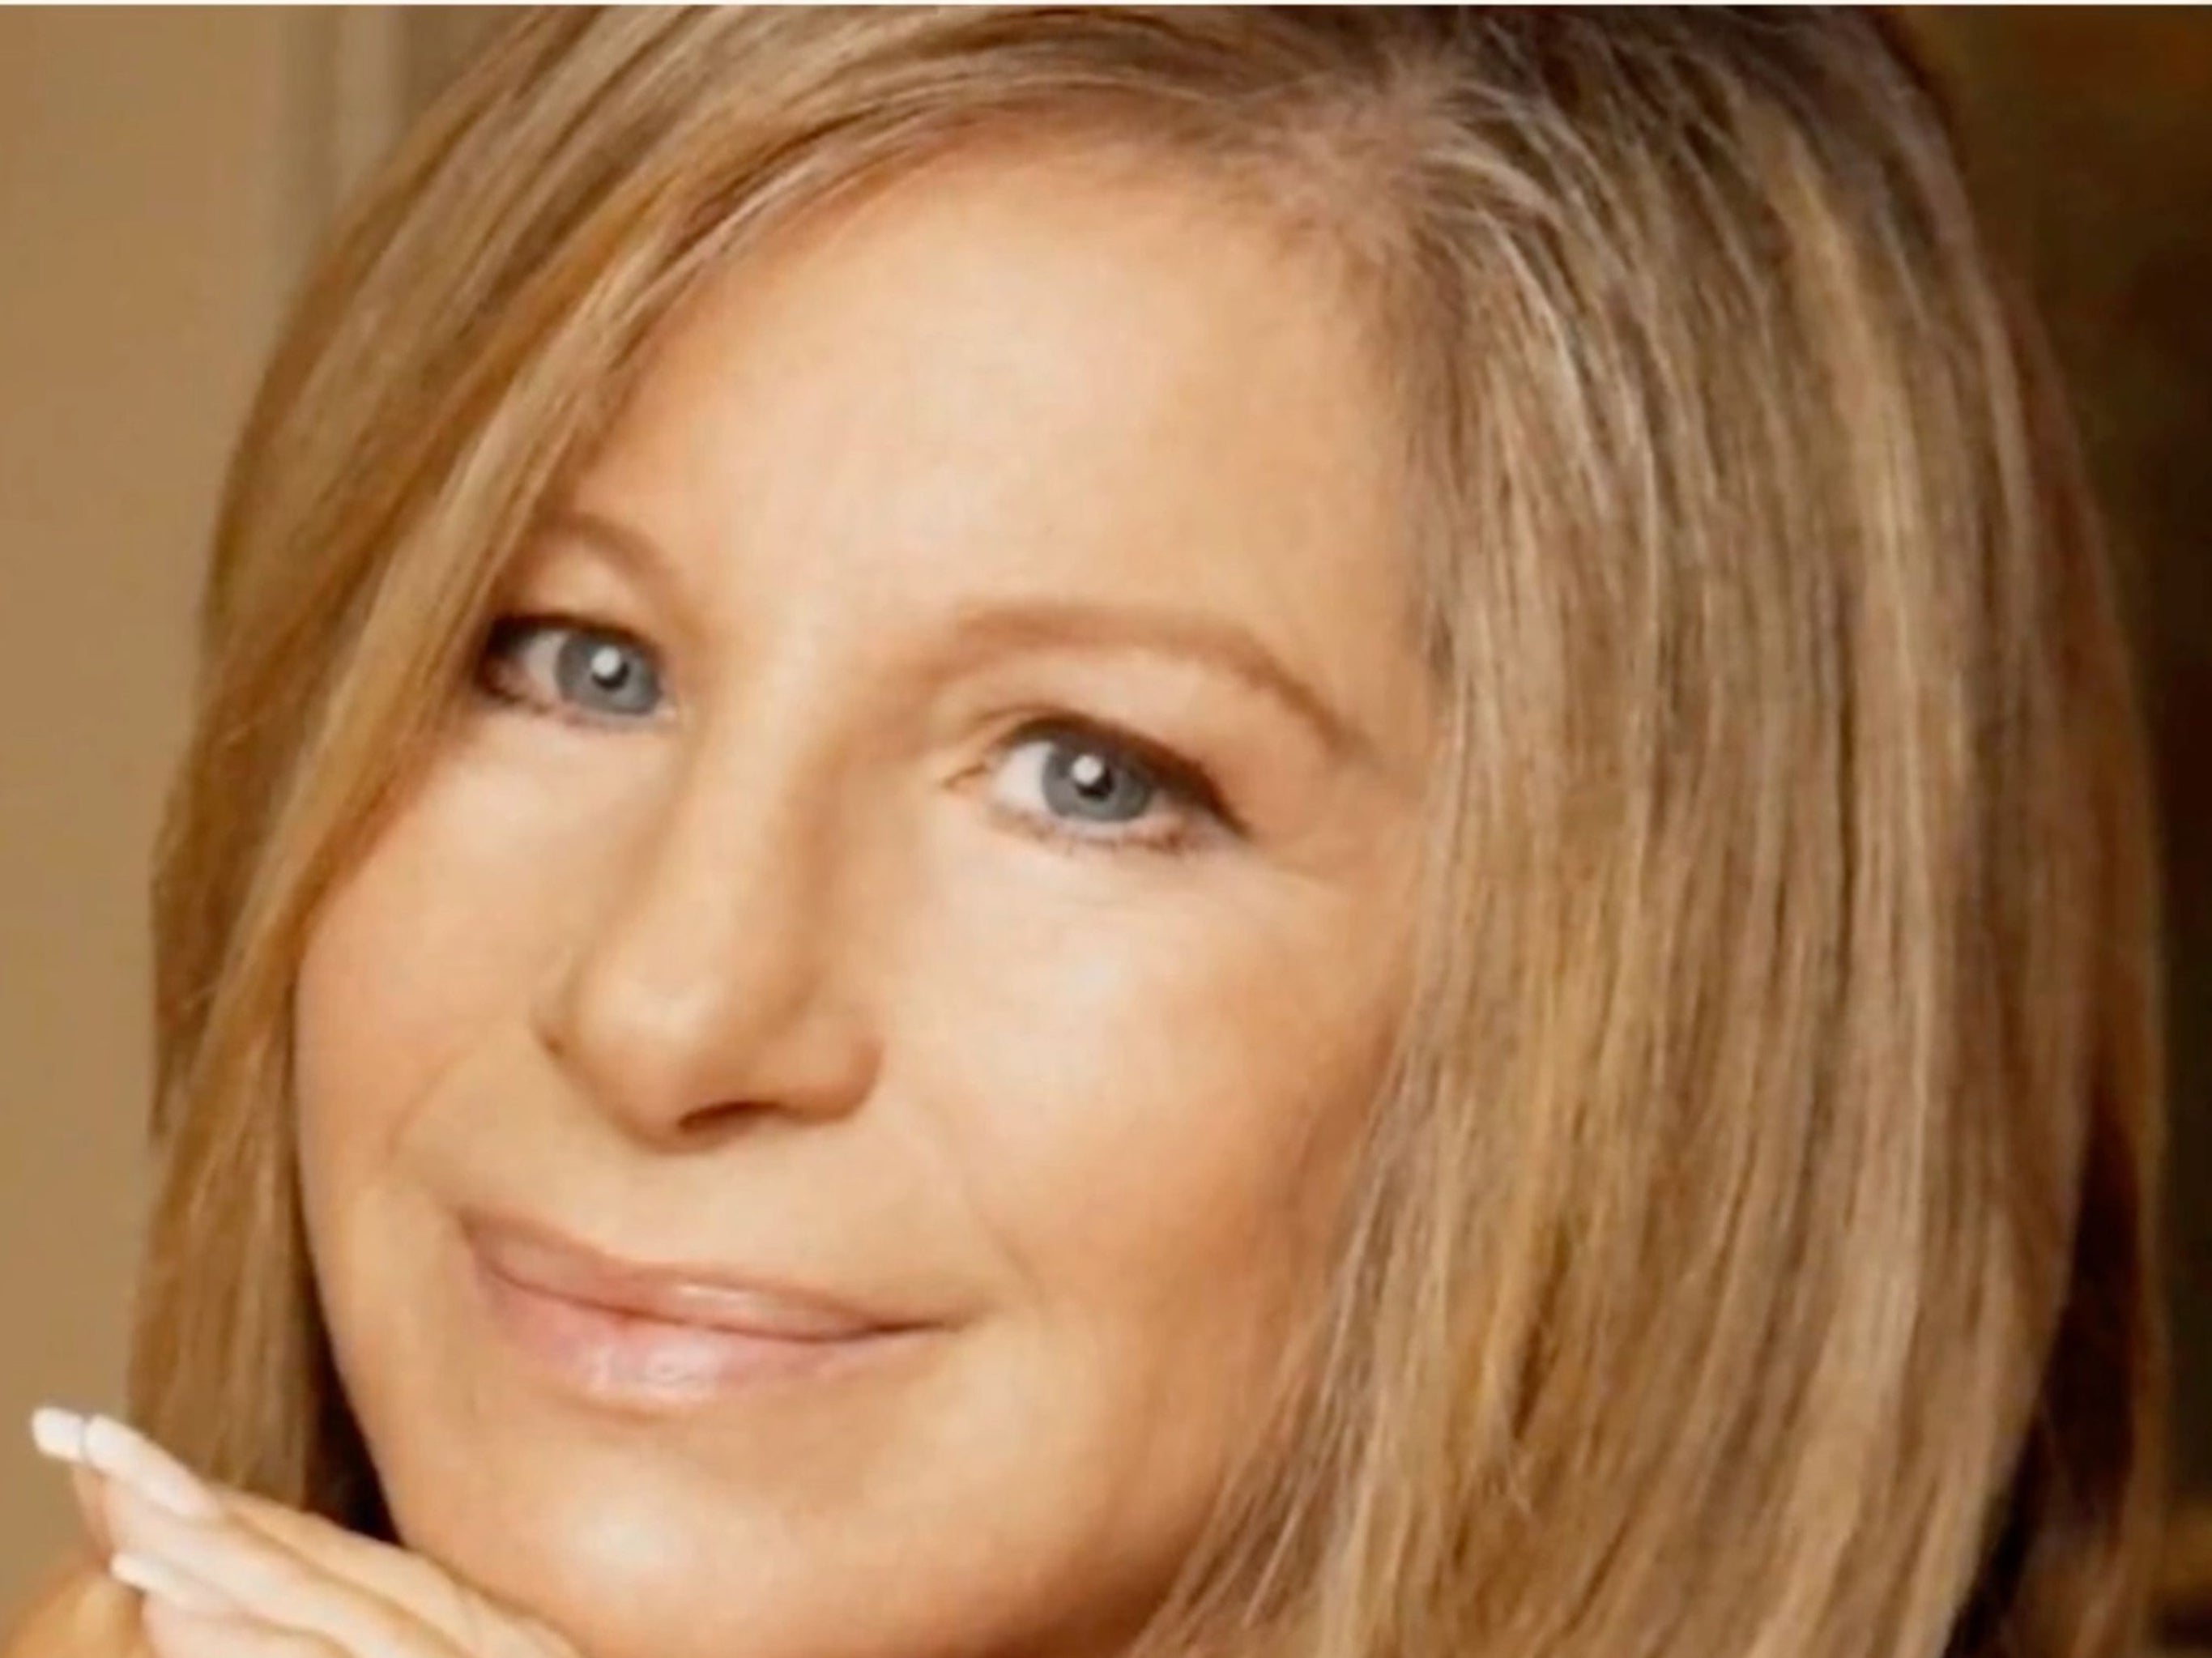 Barbra Streisand publicly commented on Melissa McCarthy's Instagram asking if she took Ozempic